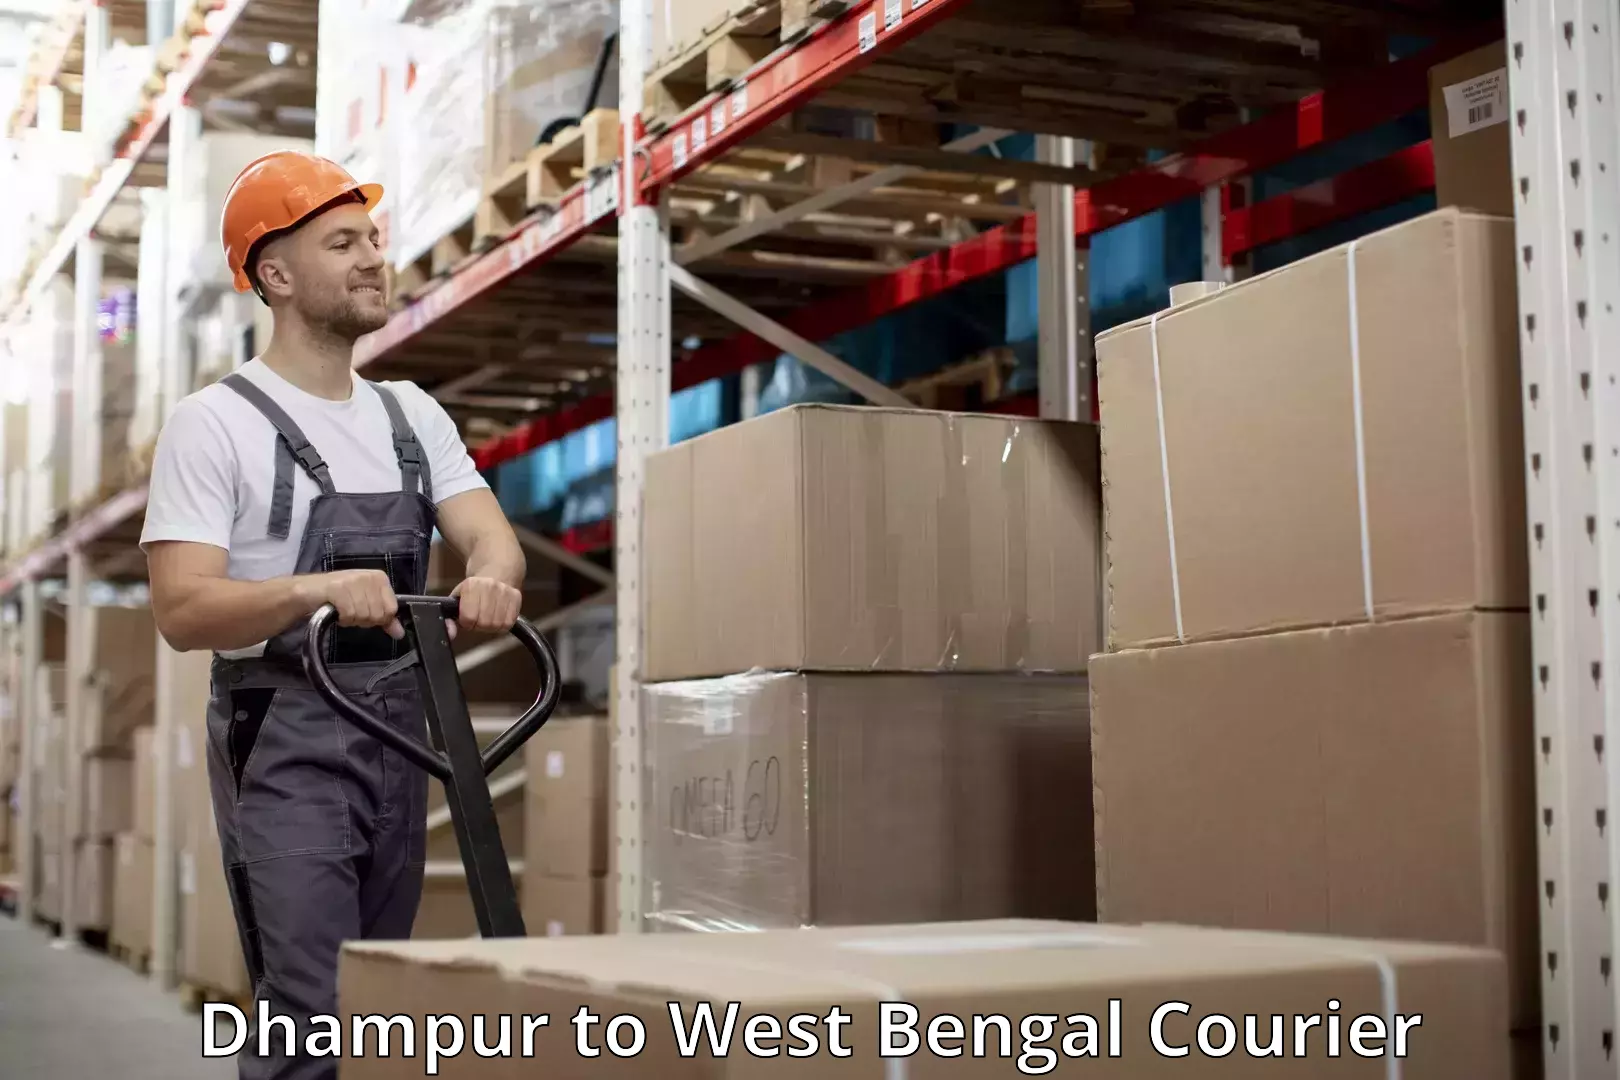 Luggage shipment specialists Dhampur to West Bengal